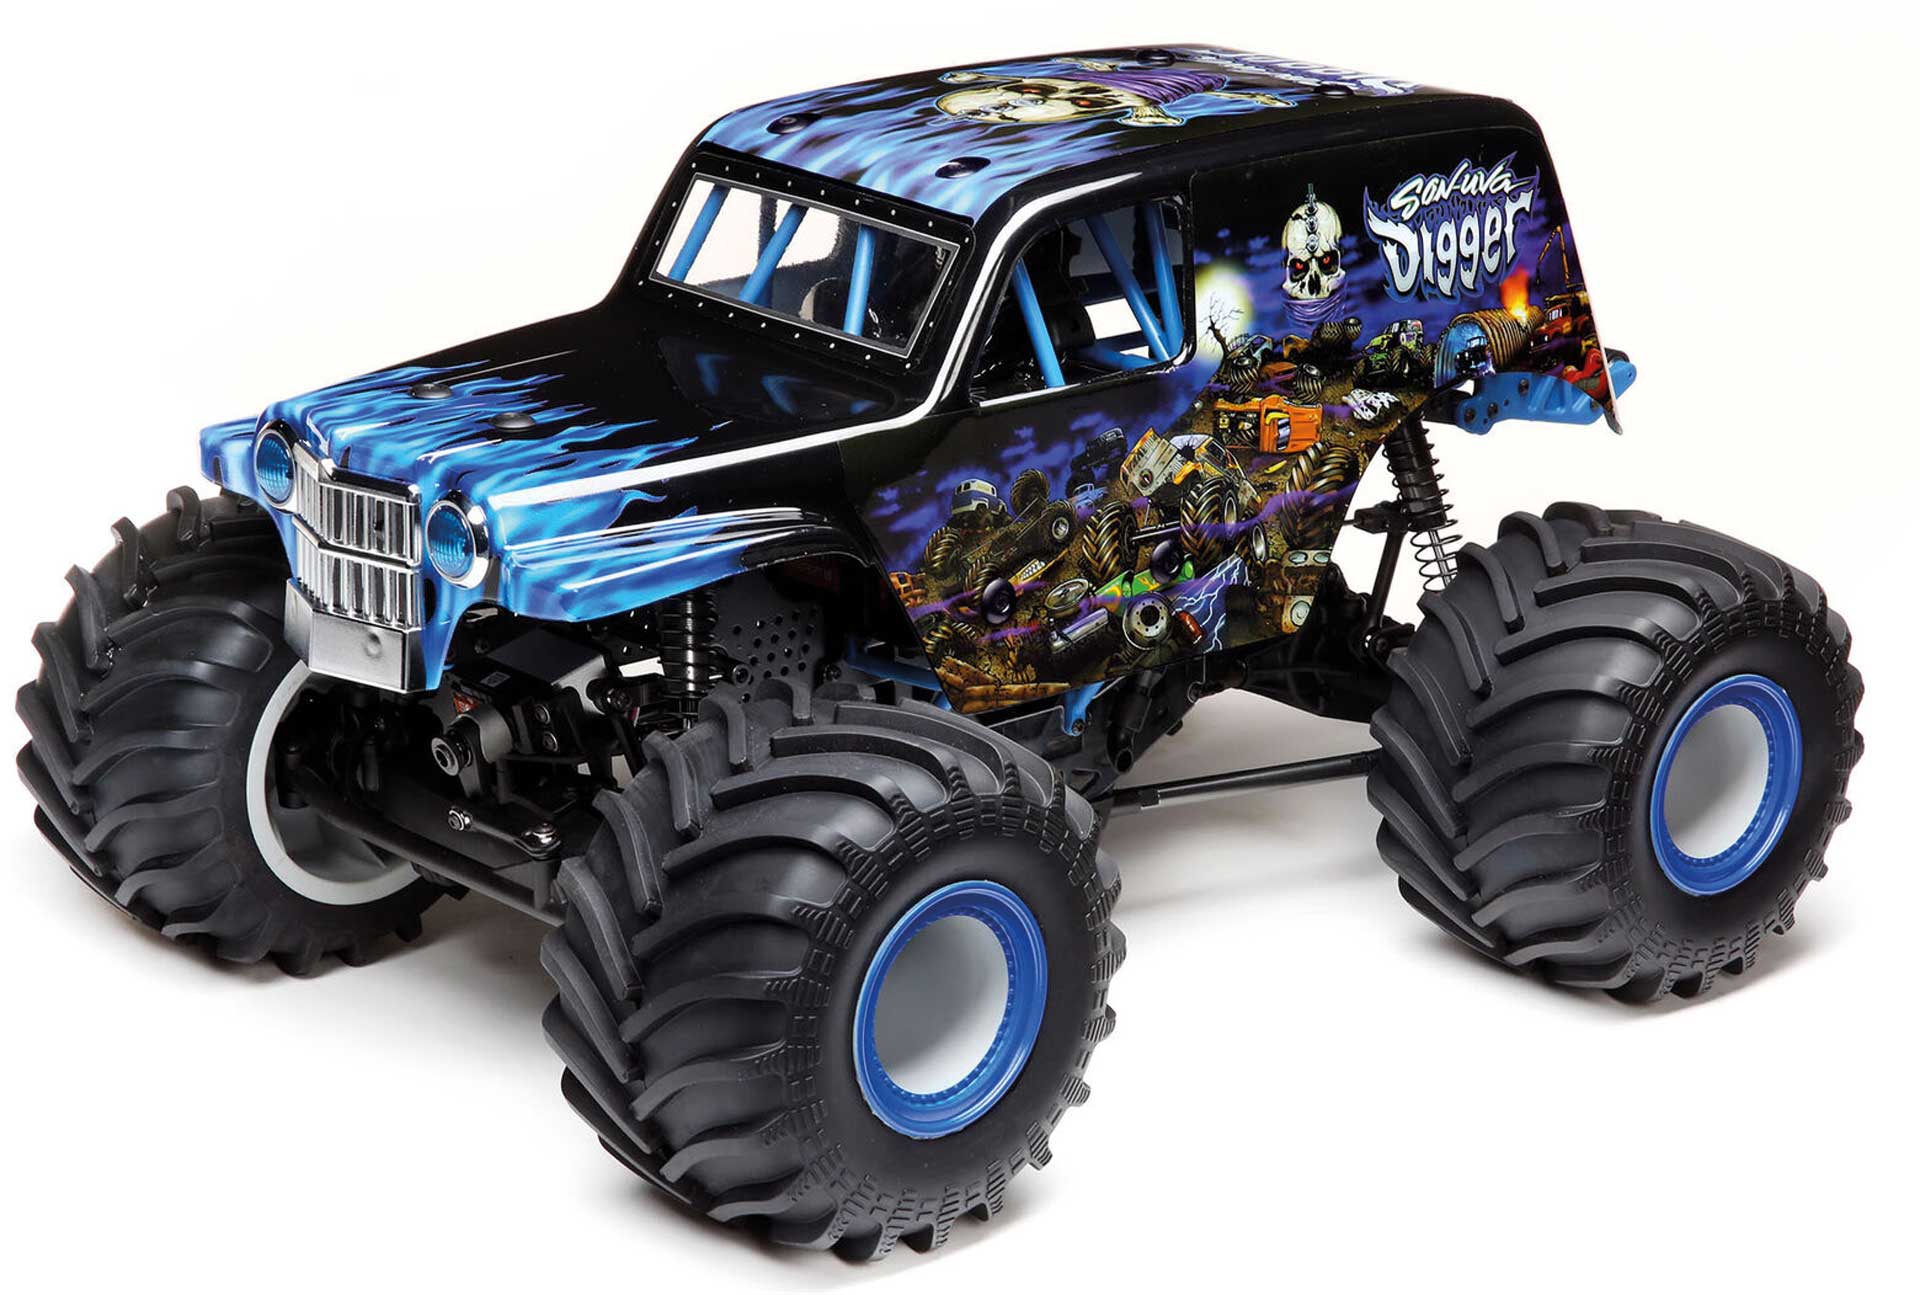 LOSI LMT 4X4 Solid Axle Monster Truck RTR, Son-uva Digger